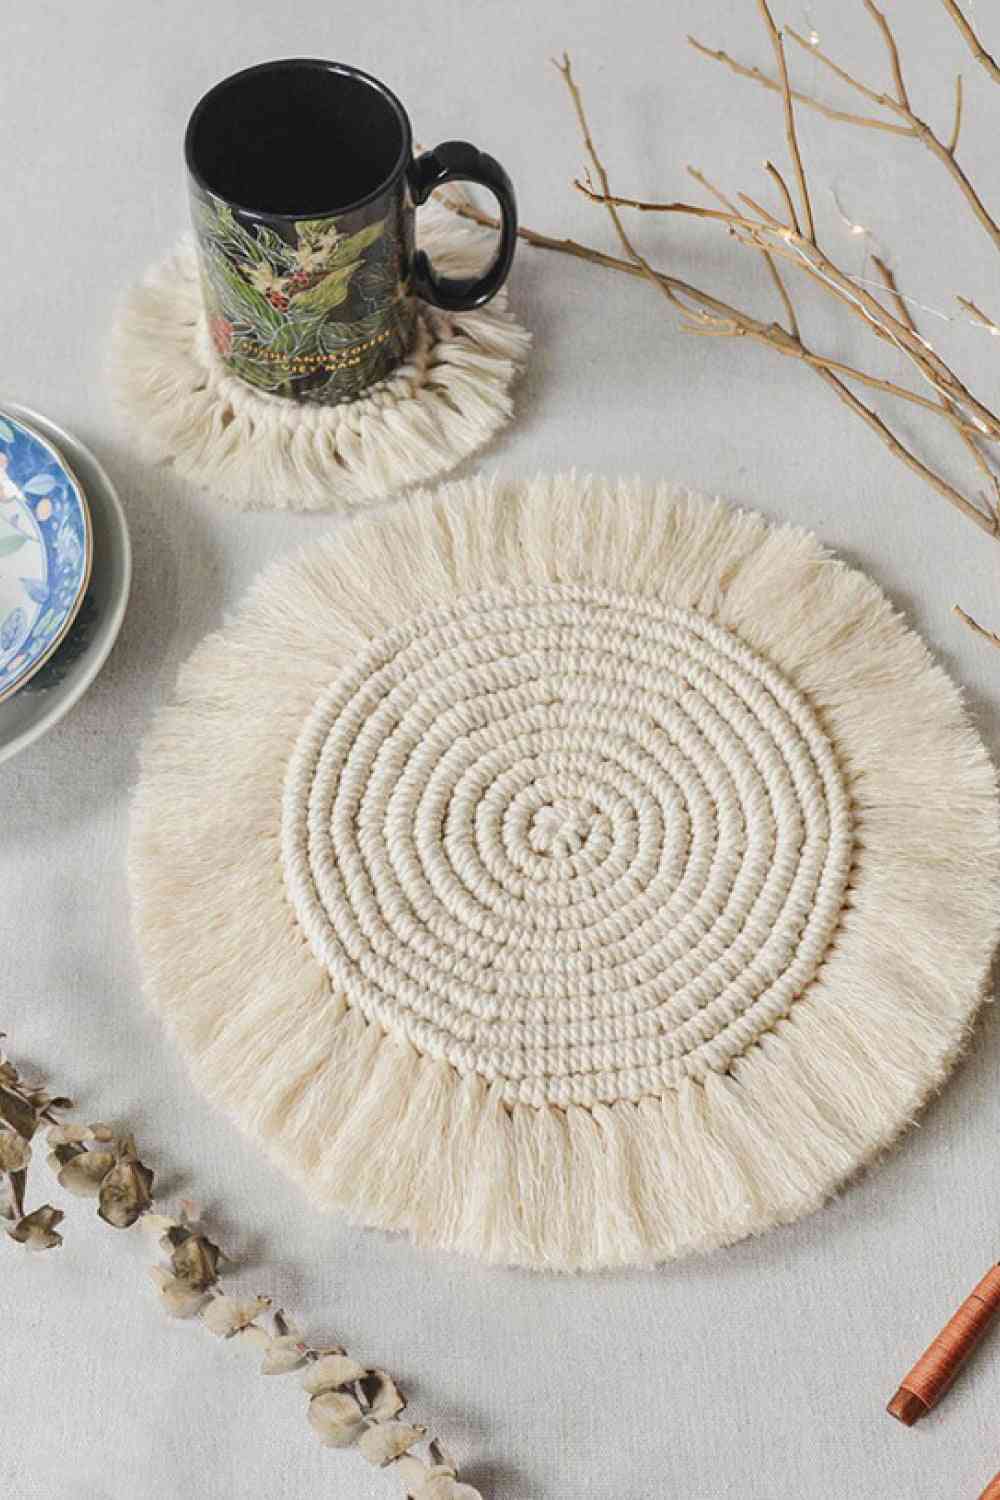 Gray Save For Later 11.8" Macrame Round Cup Mat Coaster